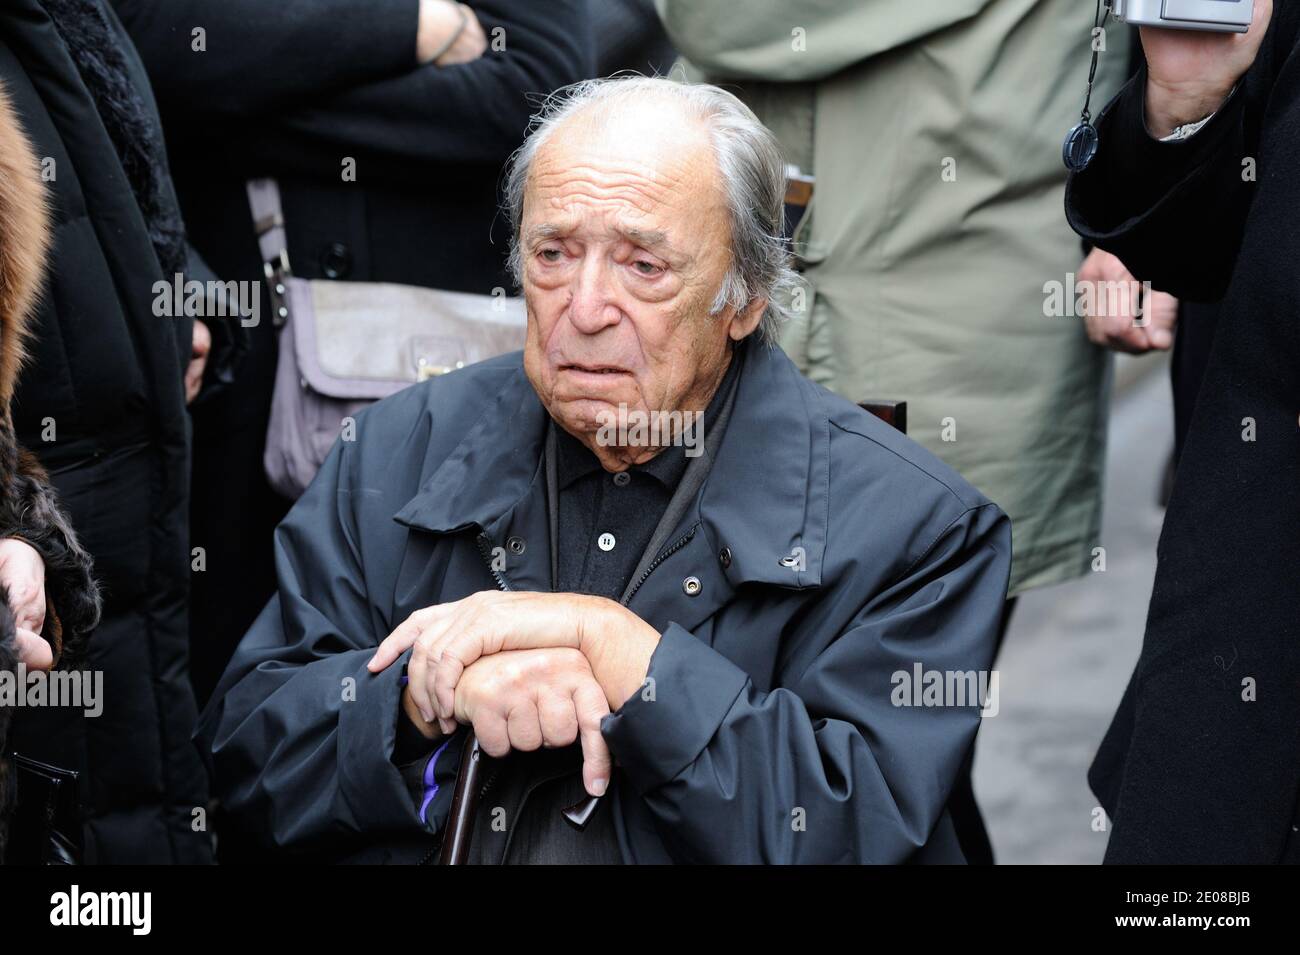 Jean-Marc Thibault attending the funeral mass for French actress Rosy Varte  at Armenian Church, Rue Jean Goujon in Paris, France on January 19, 2012.  Photo by Alban Wyters/ABACAPRESS.COM Stock Photo - Alamy